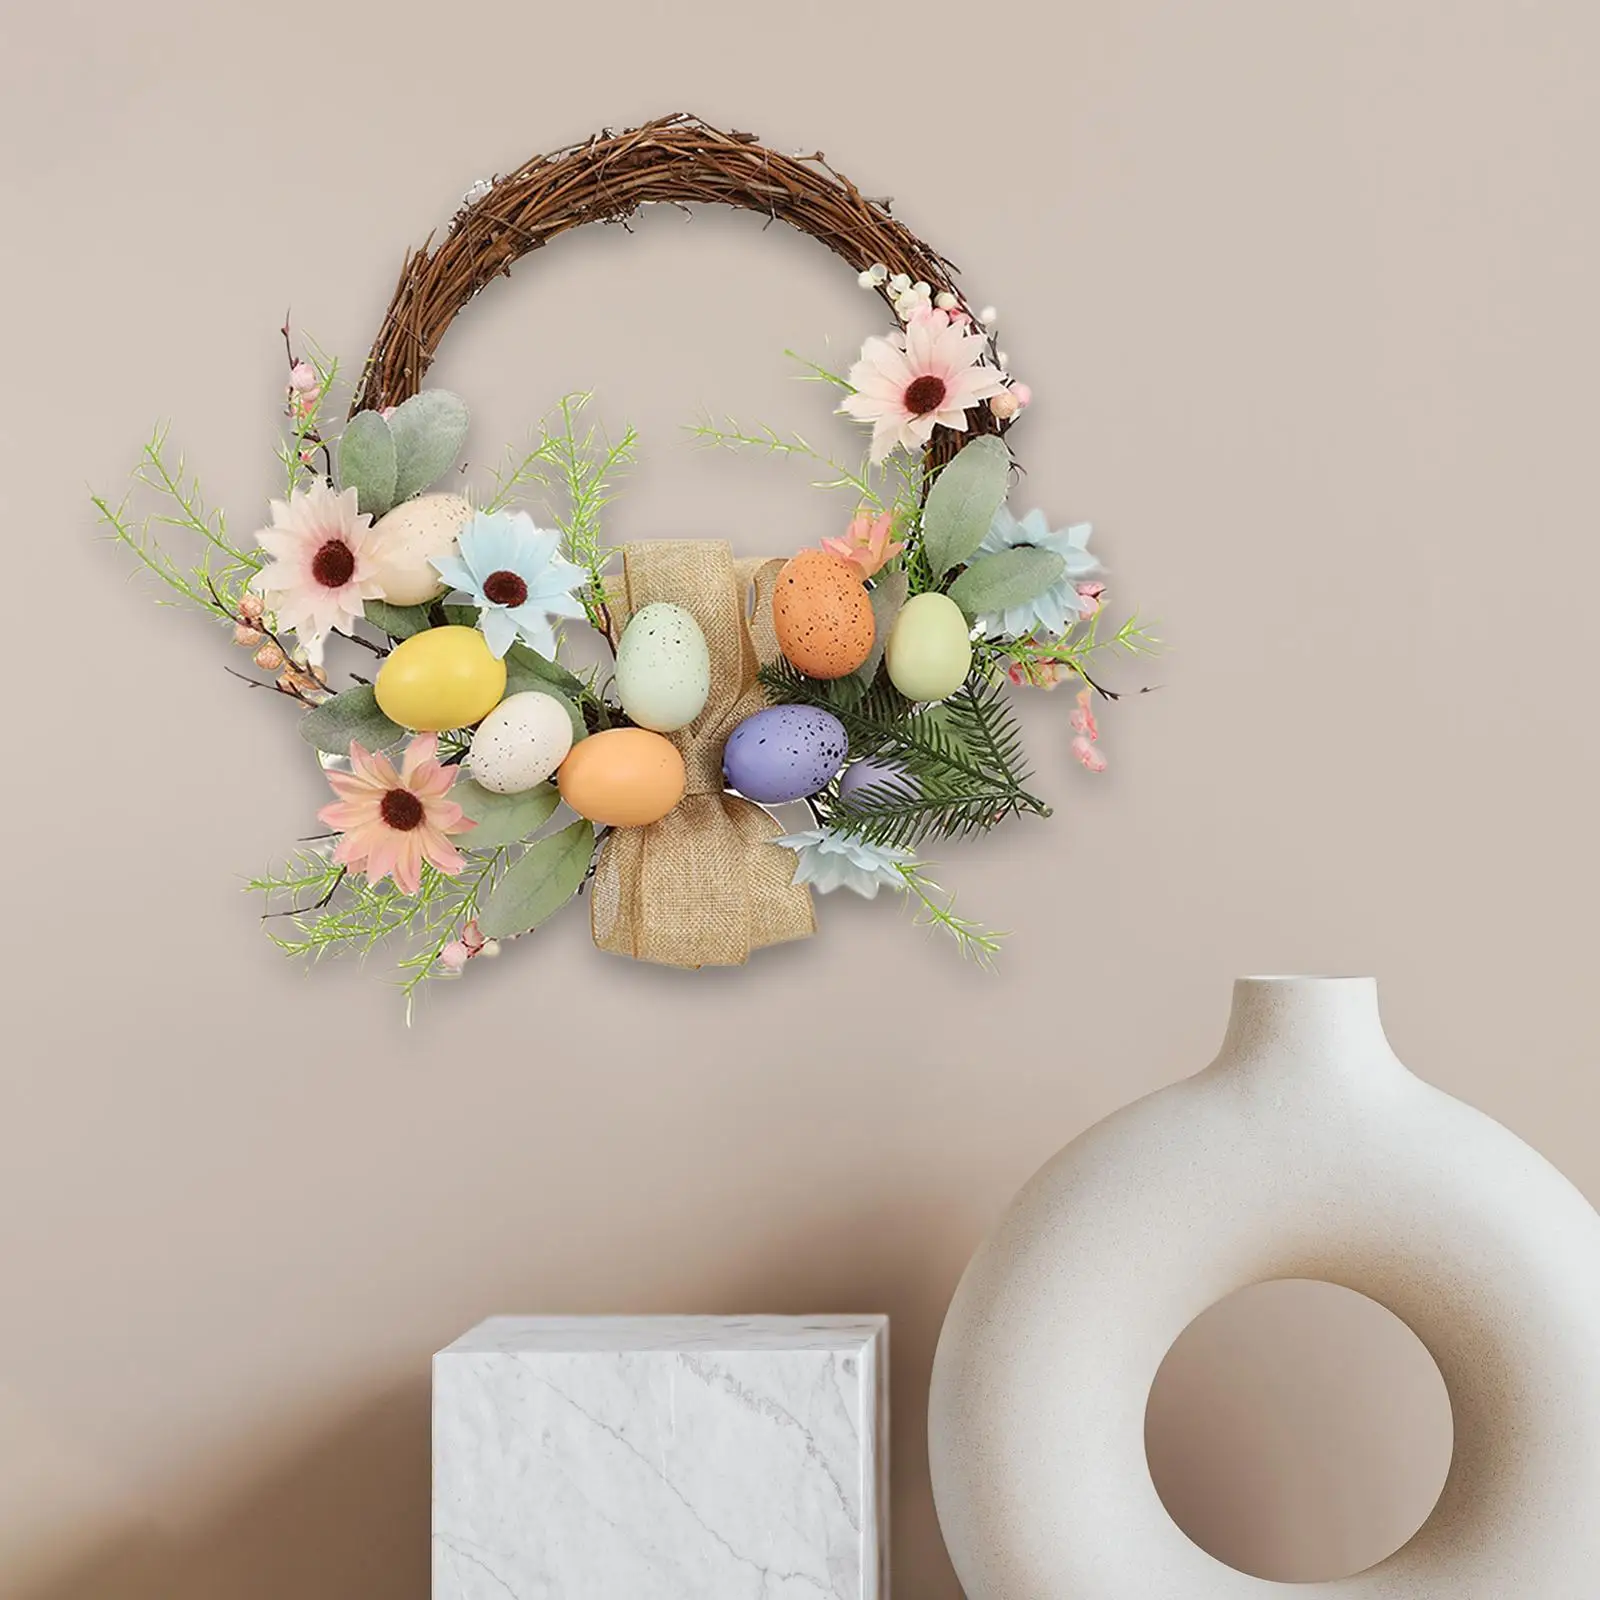 

Round Easter Wreath with Colored Eggs Ornament Hanging 40cm Artificial Flower Garland for Front Door Outdoor Farmhouse Wedding